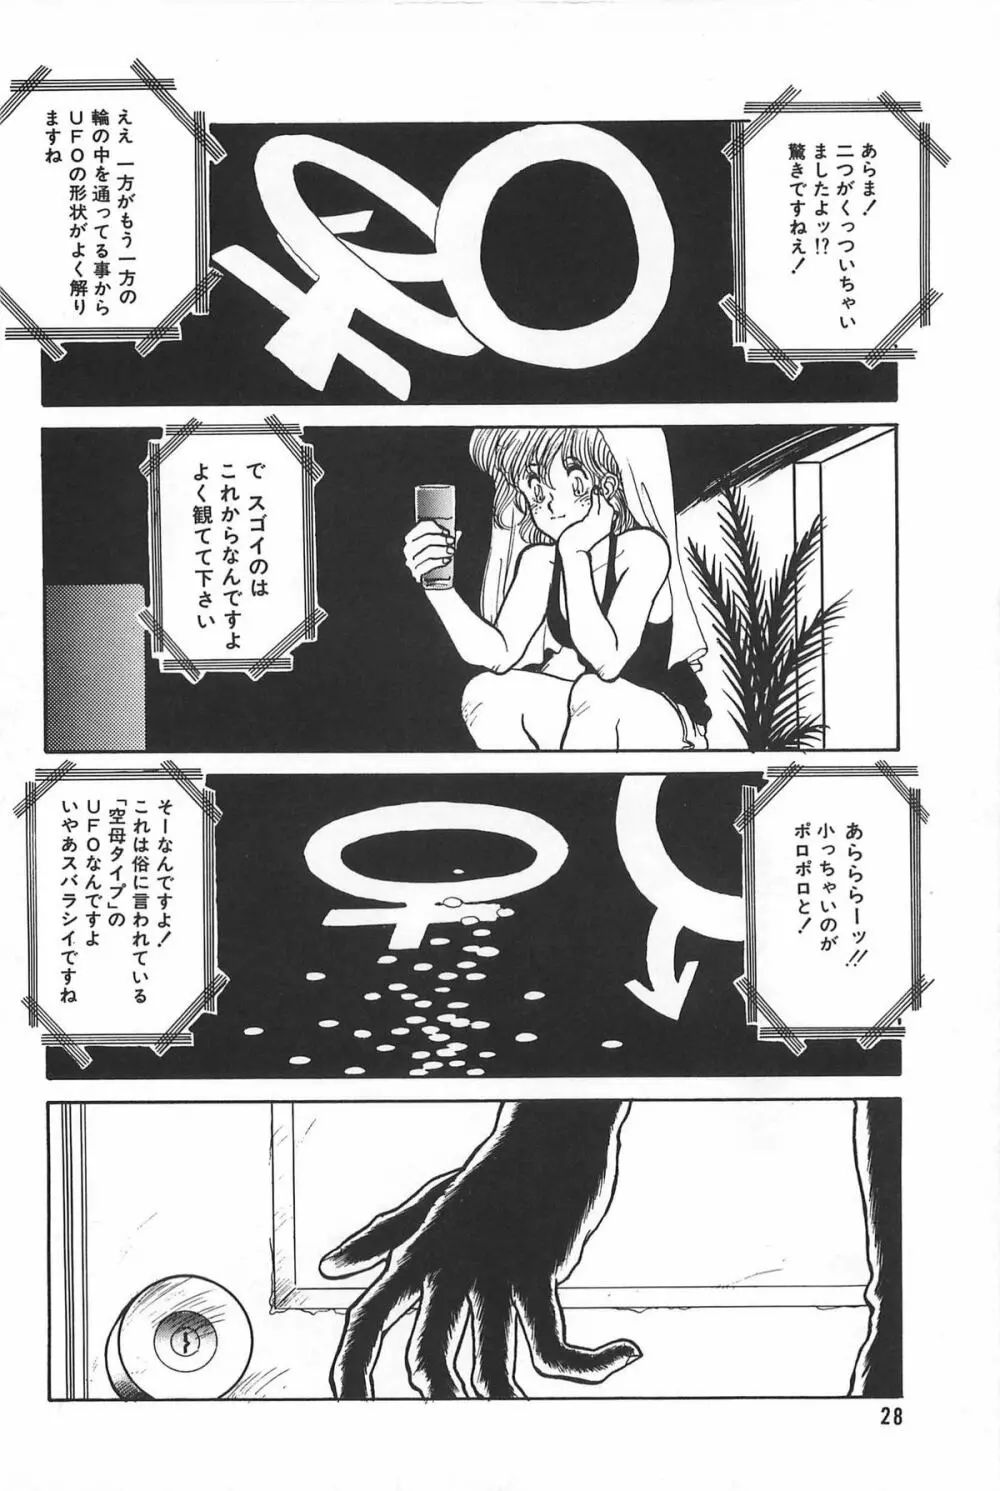 LOVE ME 1995 Page.30